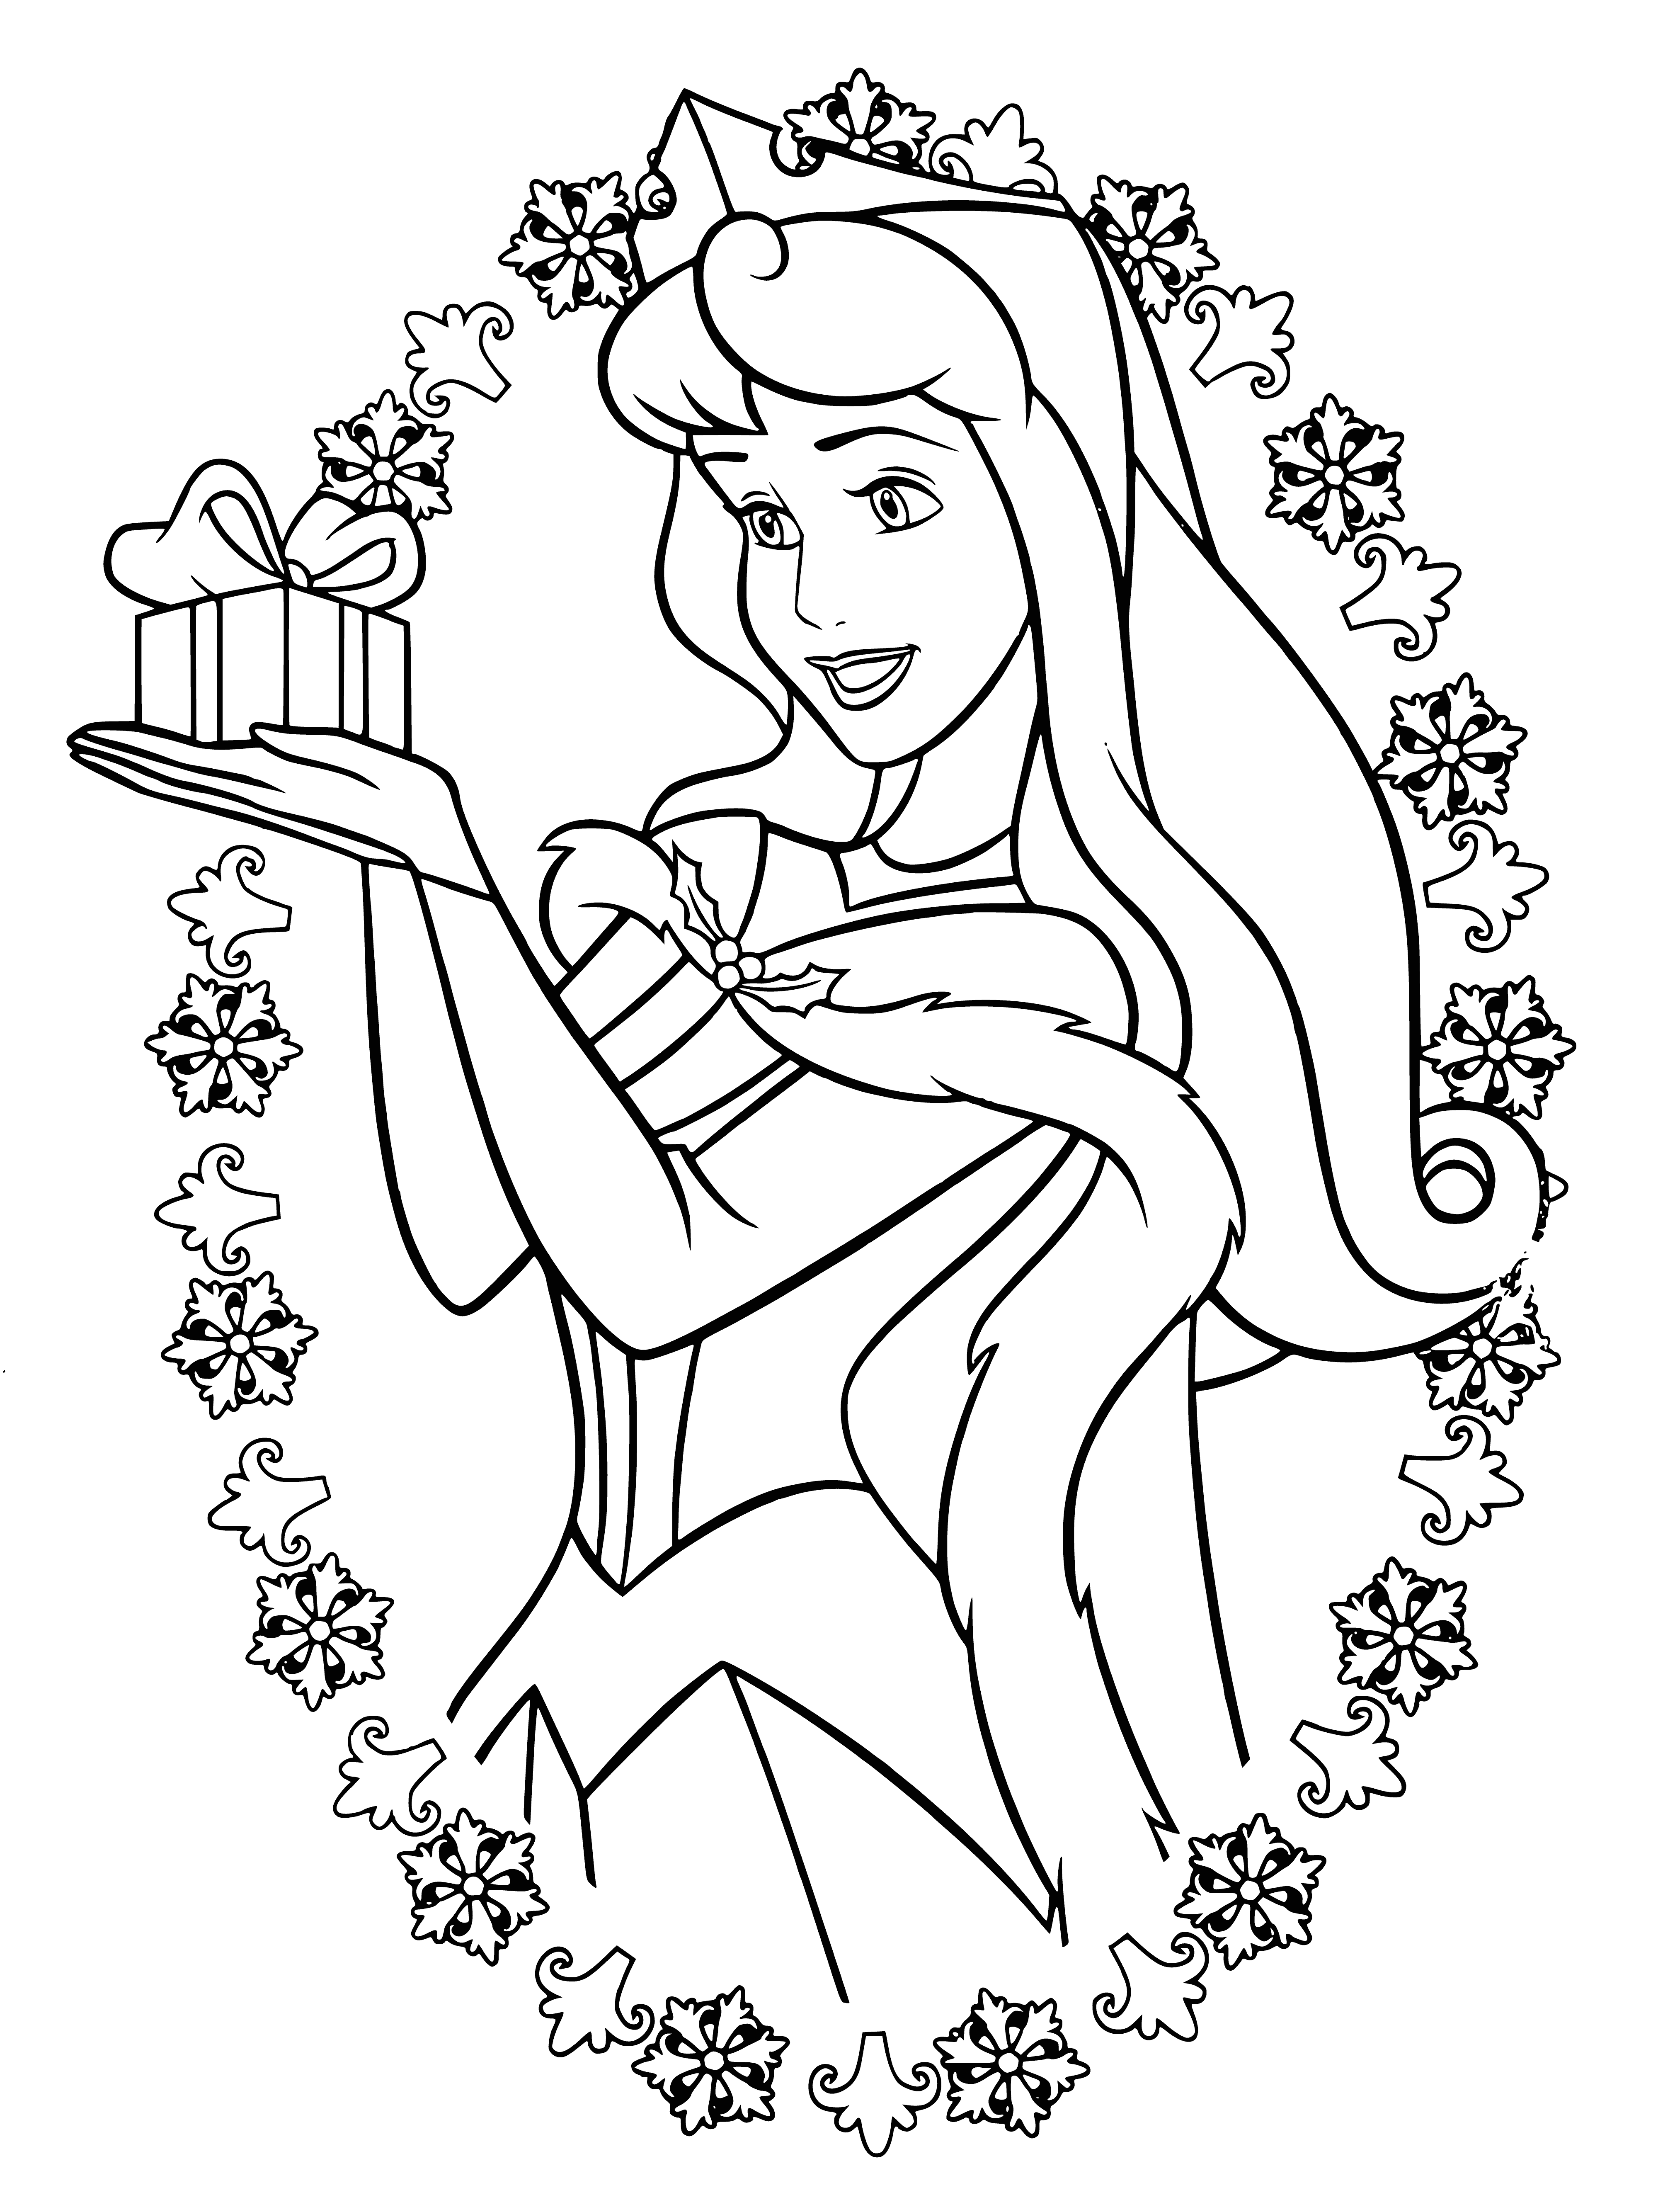 Princess Aurora with New Year's gift coloring page